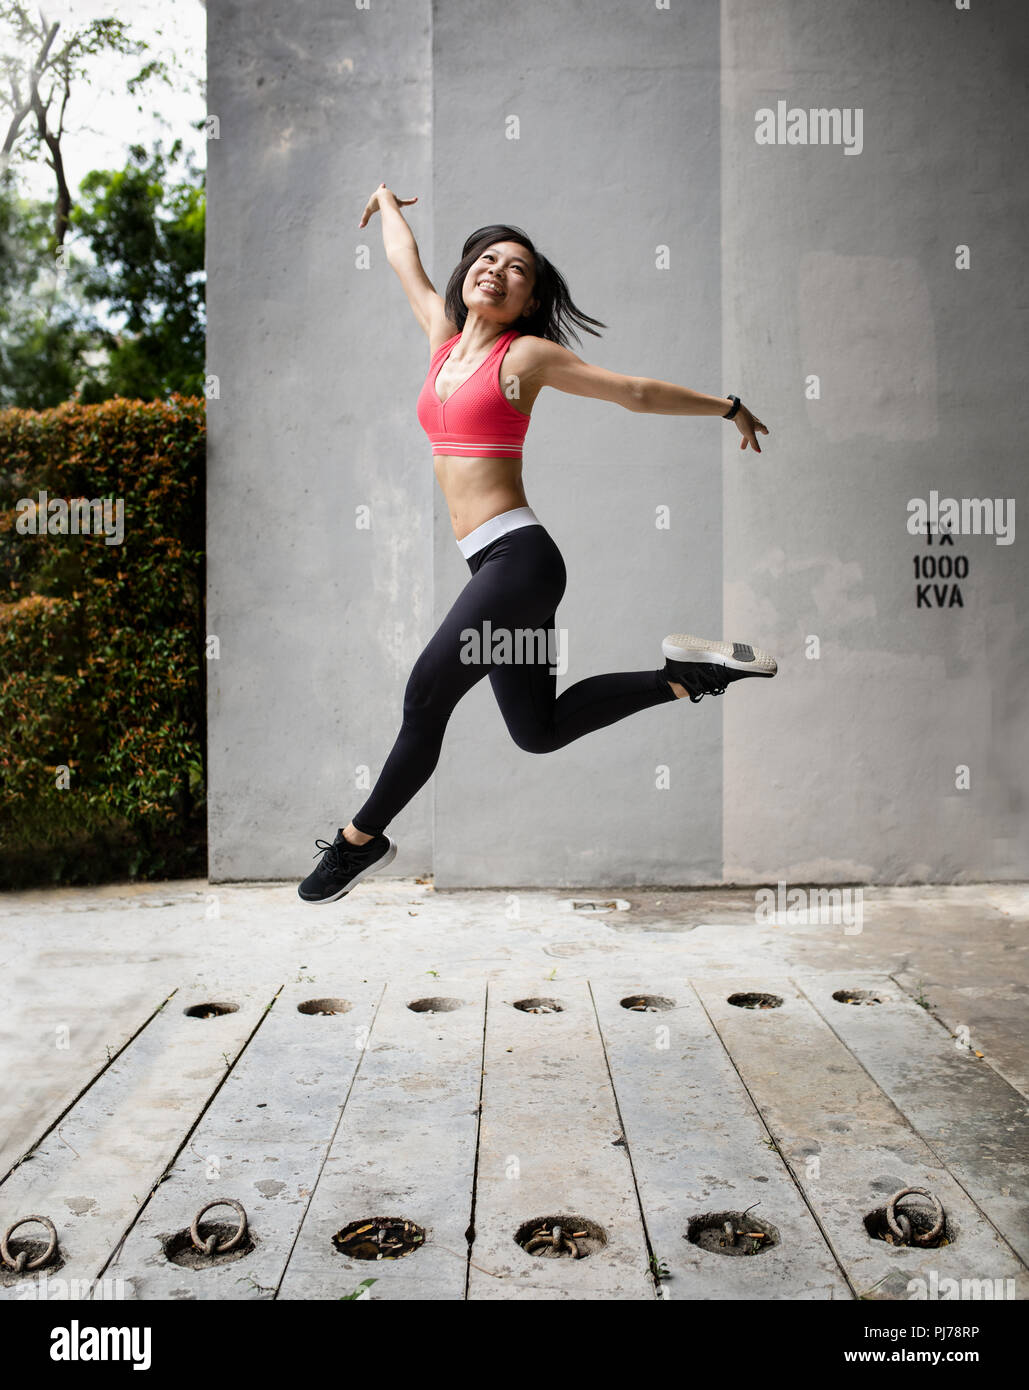 Young woman jumping for joy in urban environement Stock Photo